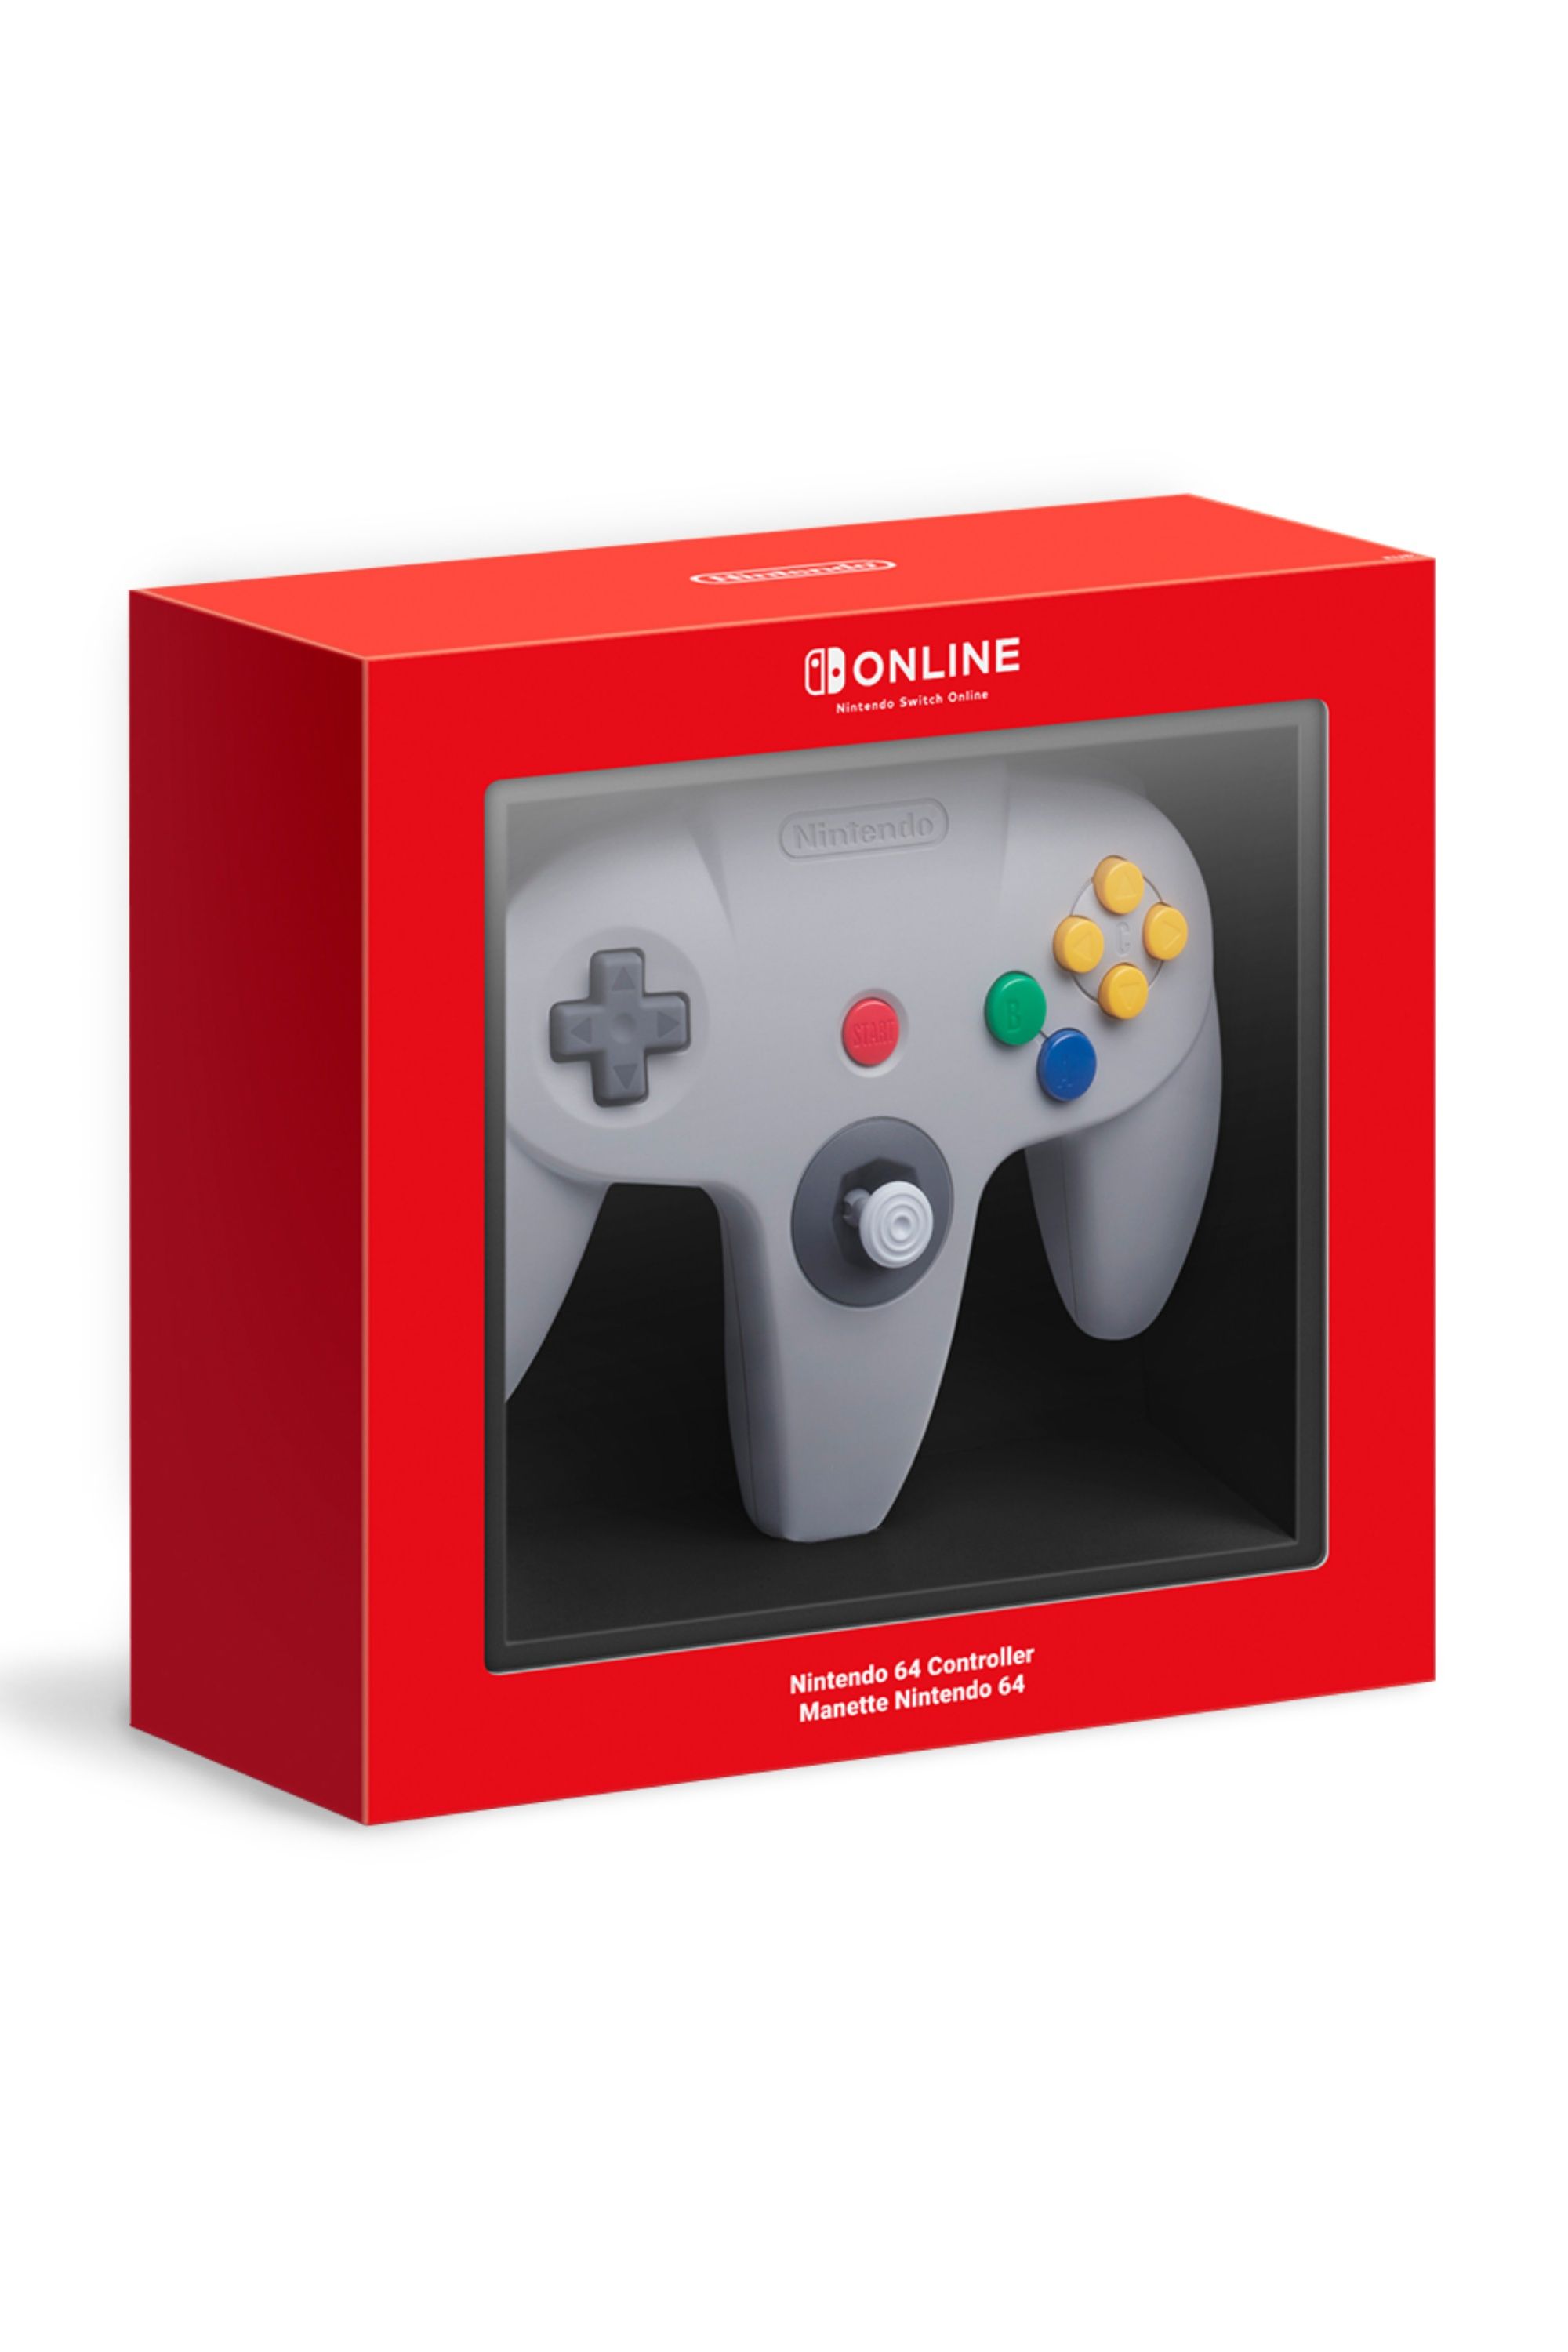 nintendo 64 switch controller in its box